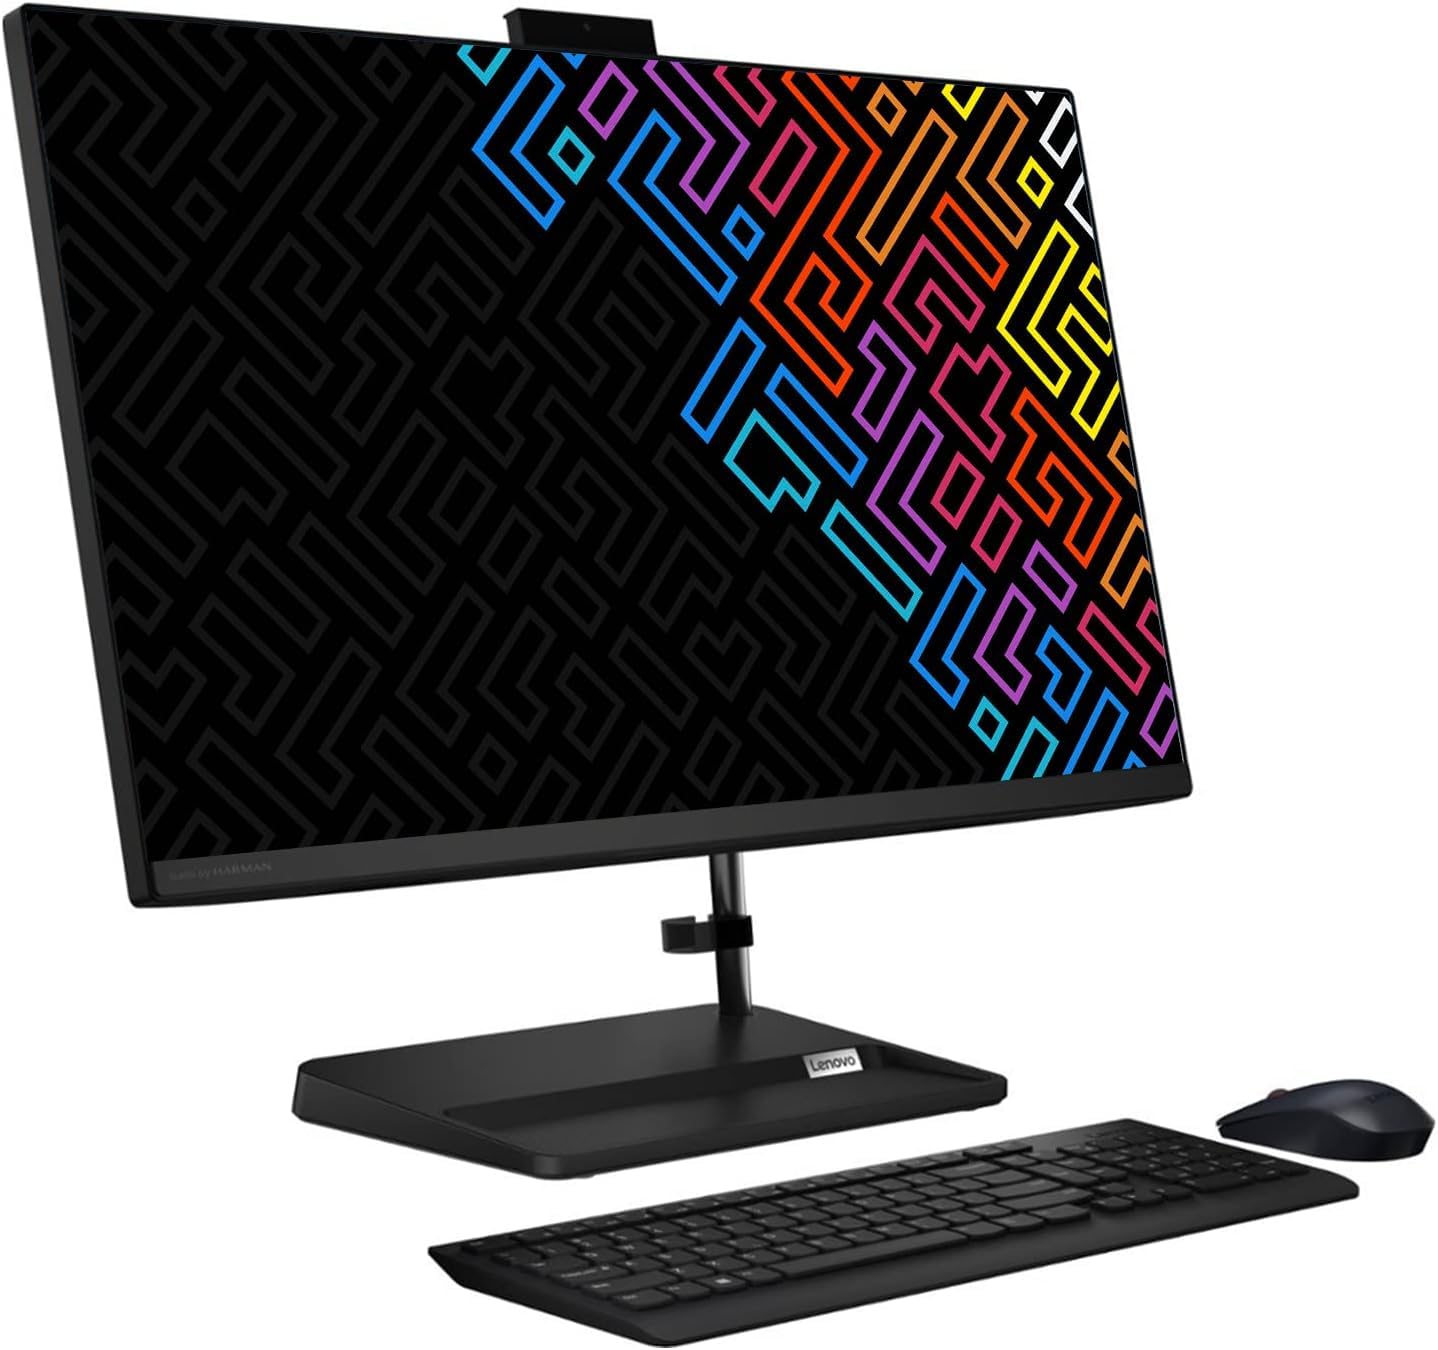 Lenovo IdeaCentre 3i 27" FHD Touchscreen All-in-One Desktop Computer - 13th Gen Intel 10-Core i7-13620H up to 4.9GHz CPU, 16GB RAM, 256GB NVMe SSD, Intel UHD Graphics, Audio by Harman, Windows 11 Home